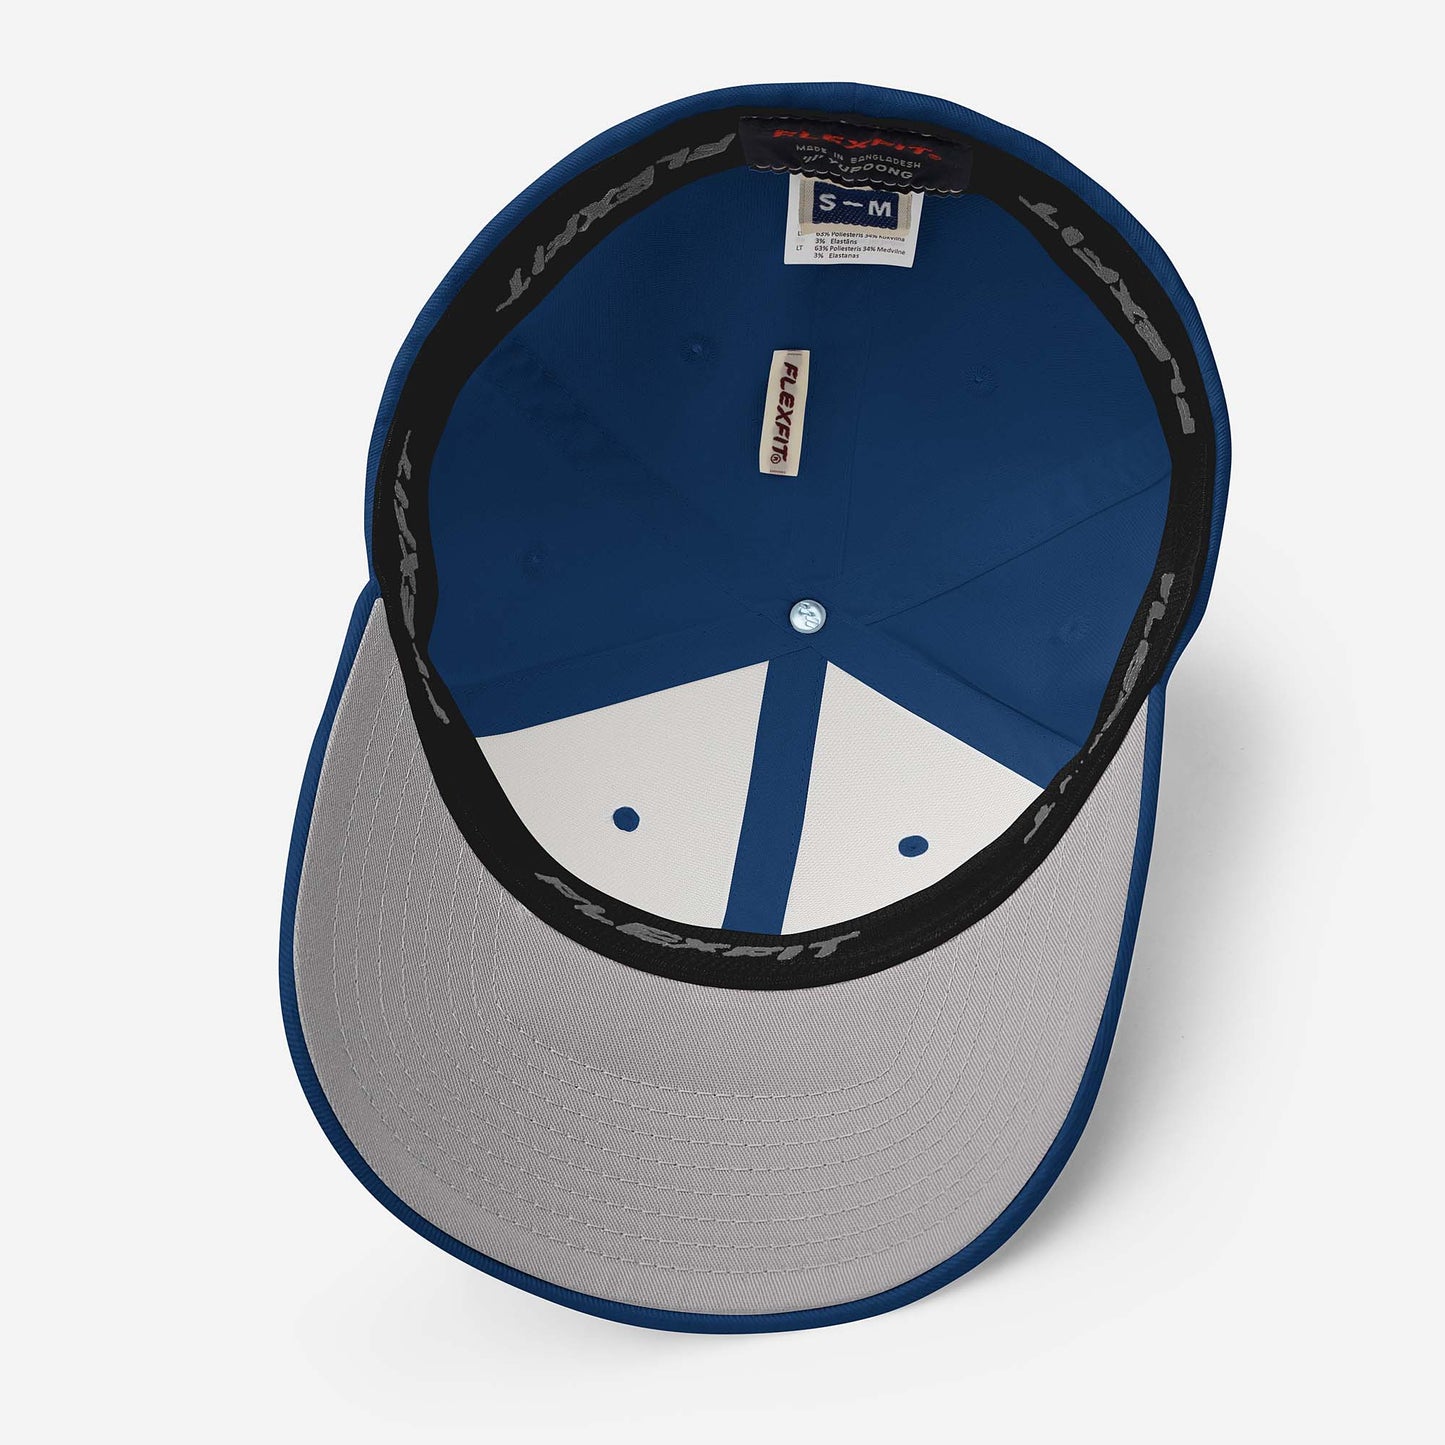 Royal blue fitted baseball hat with white embroidery front and back